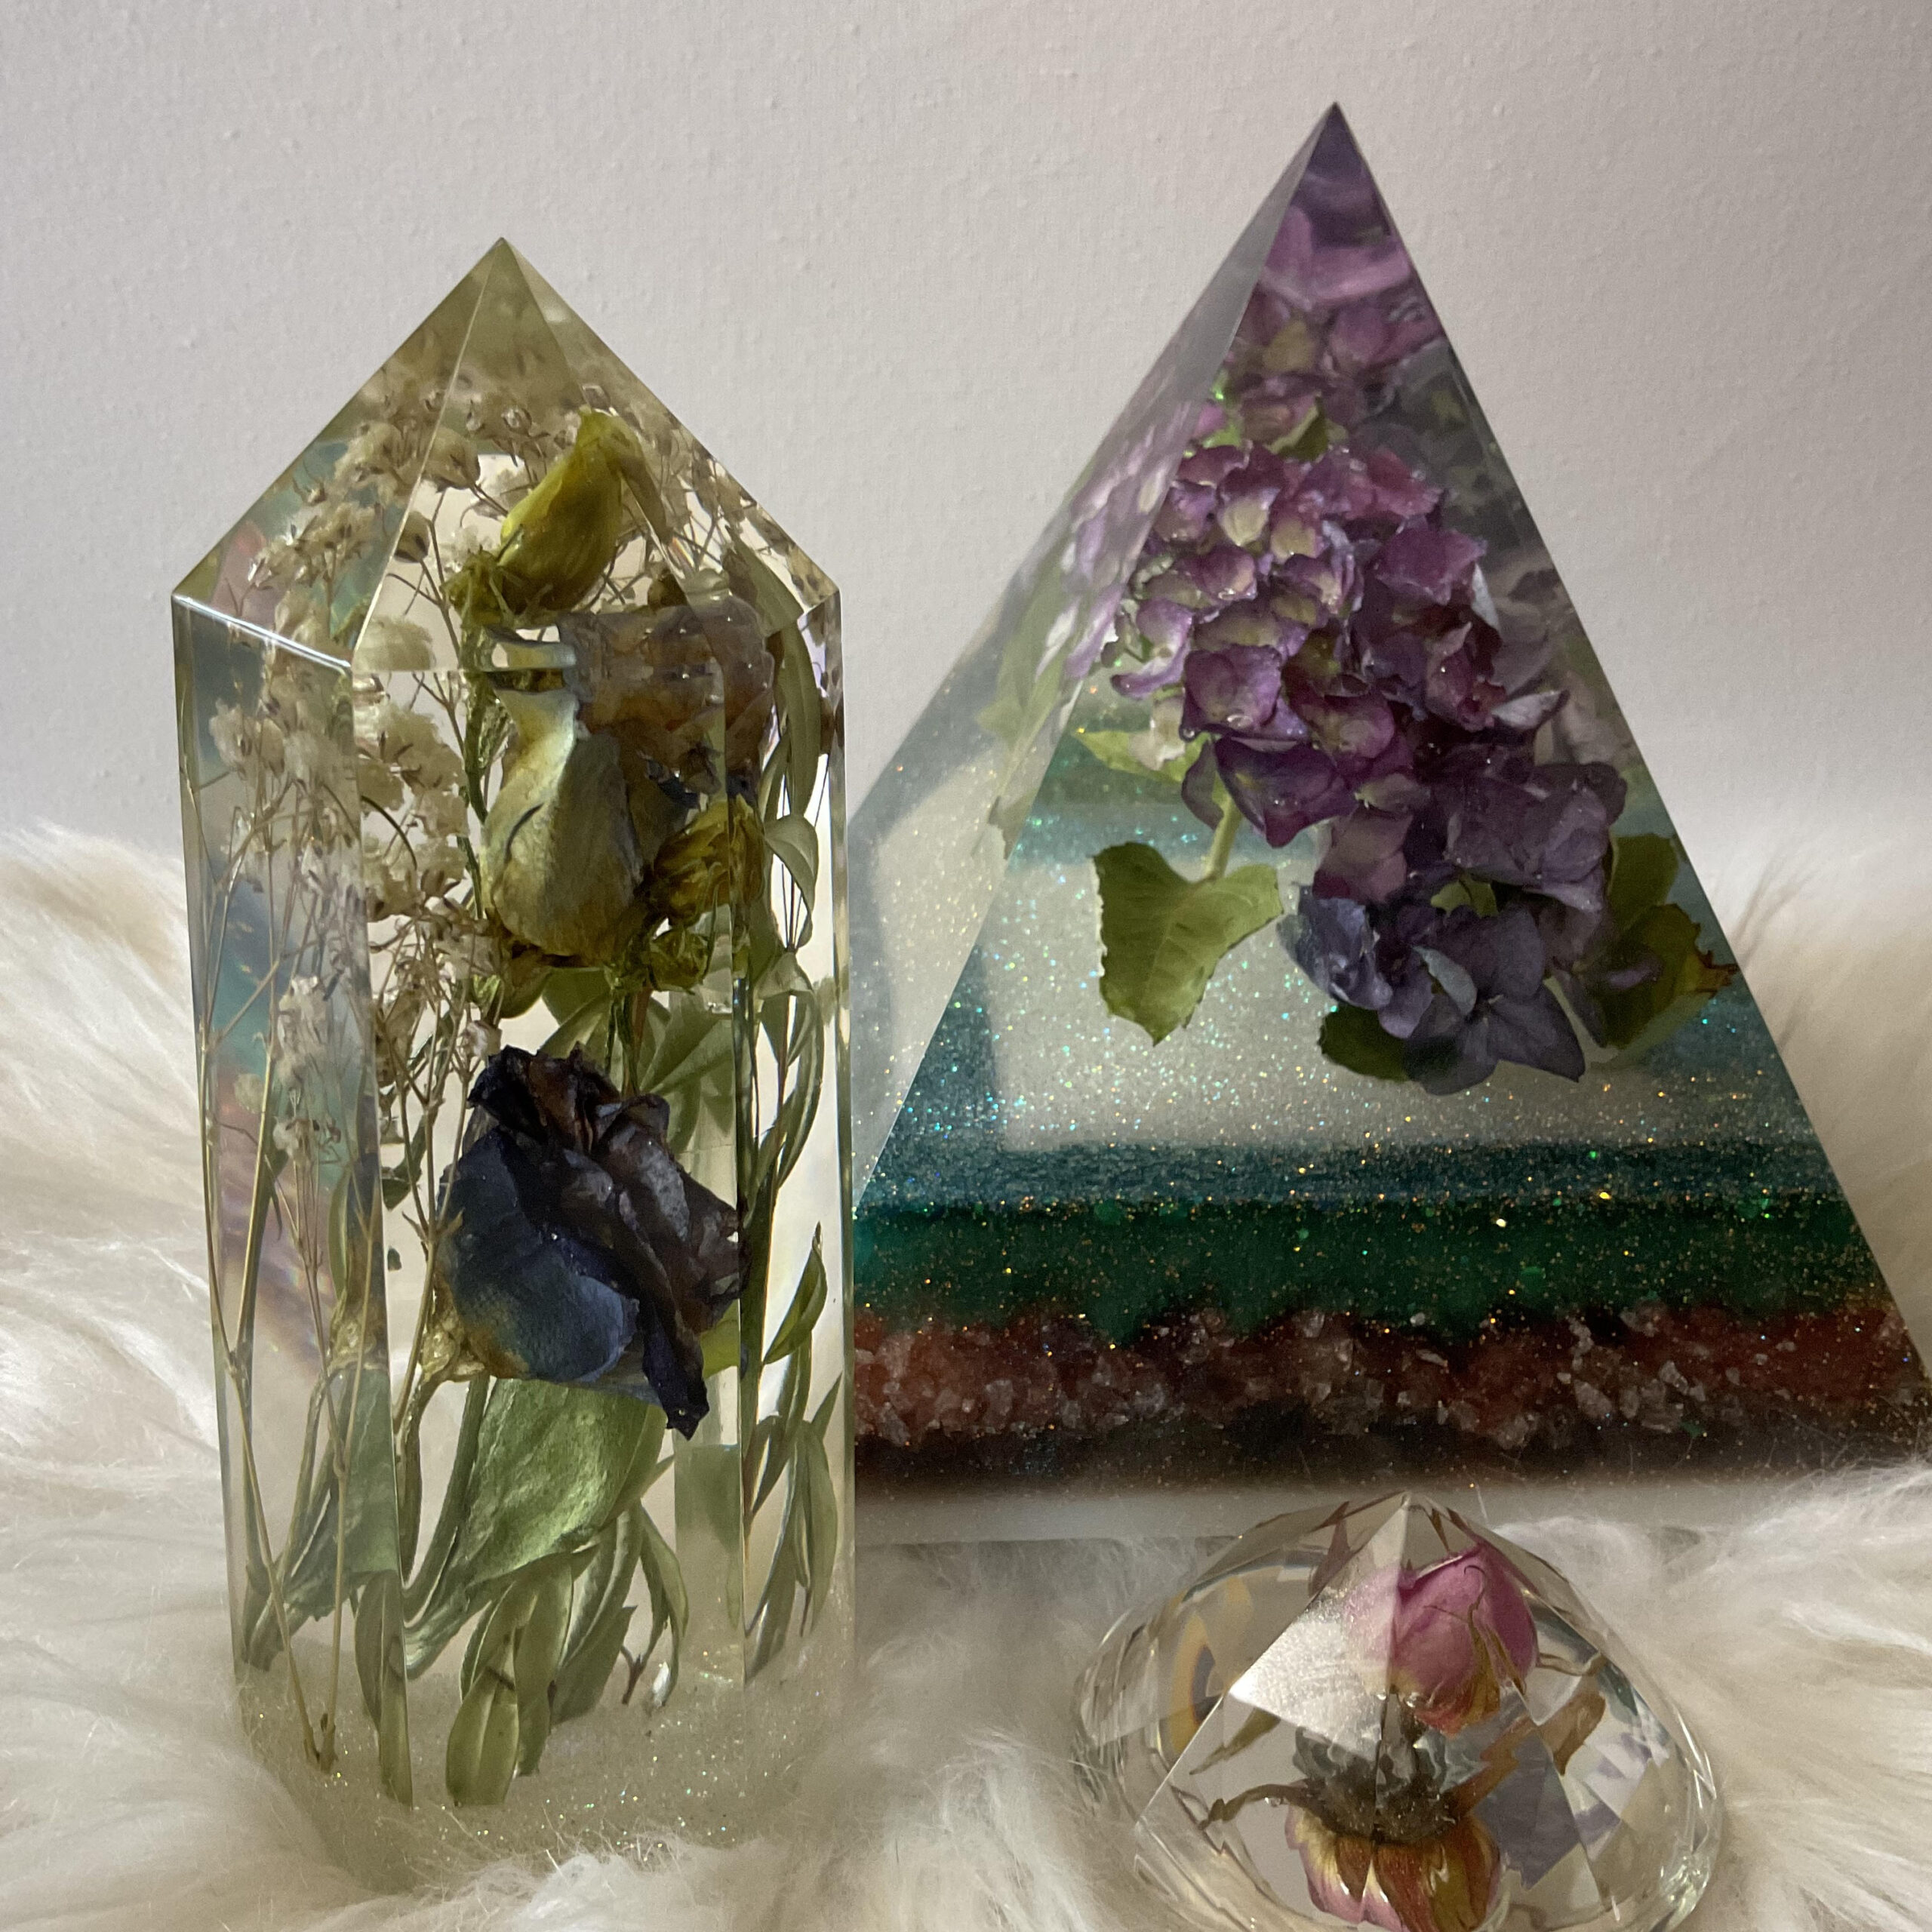 How to casting dried flowers in epoxy resin - ResinPro